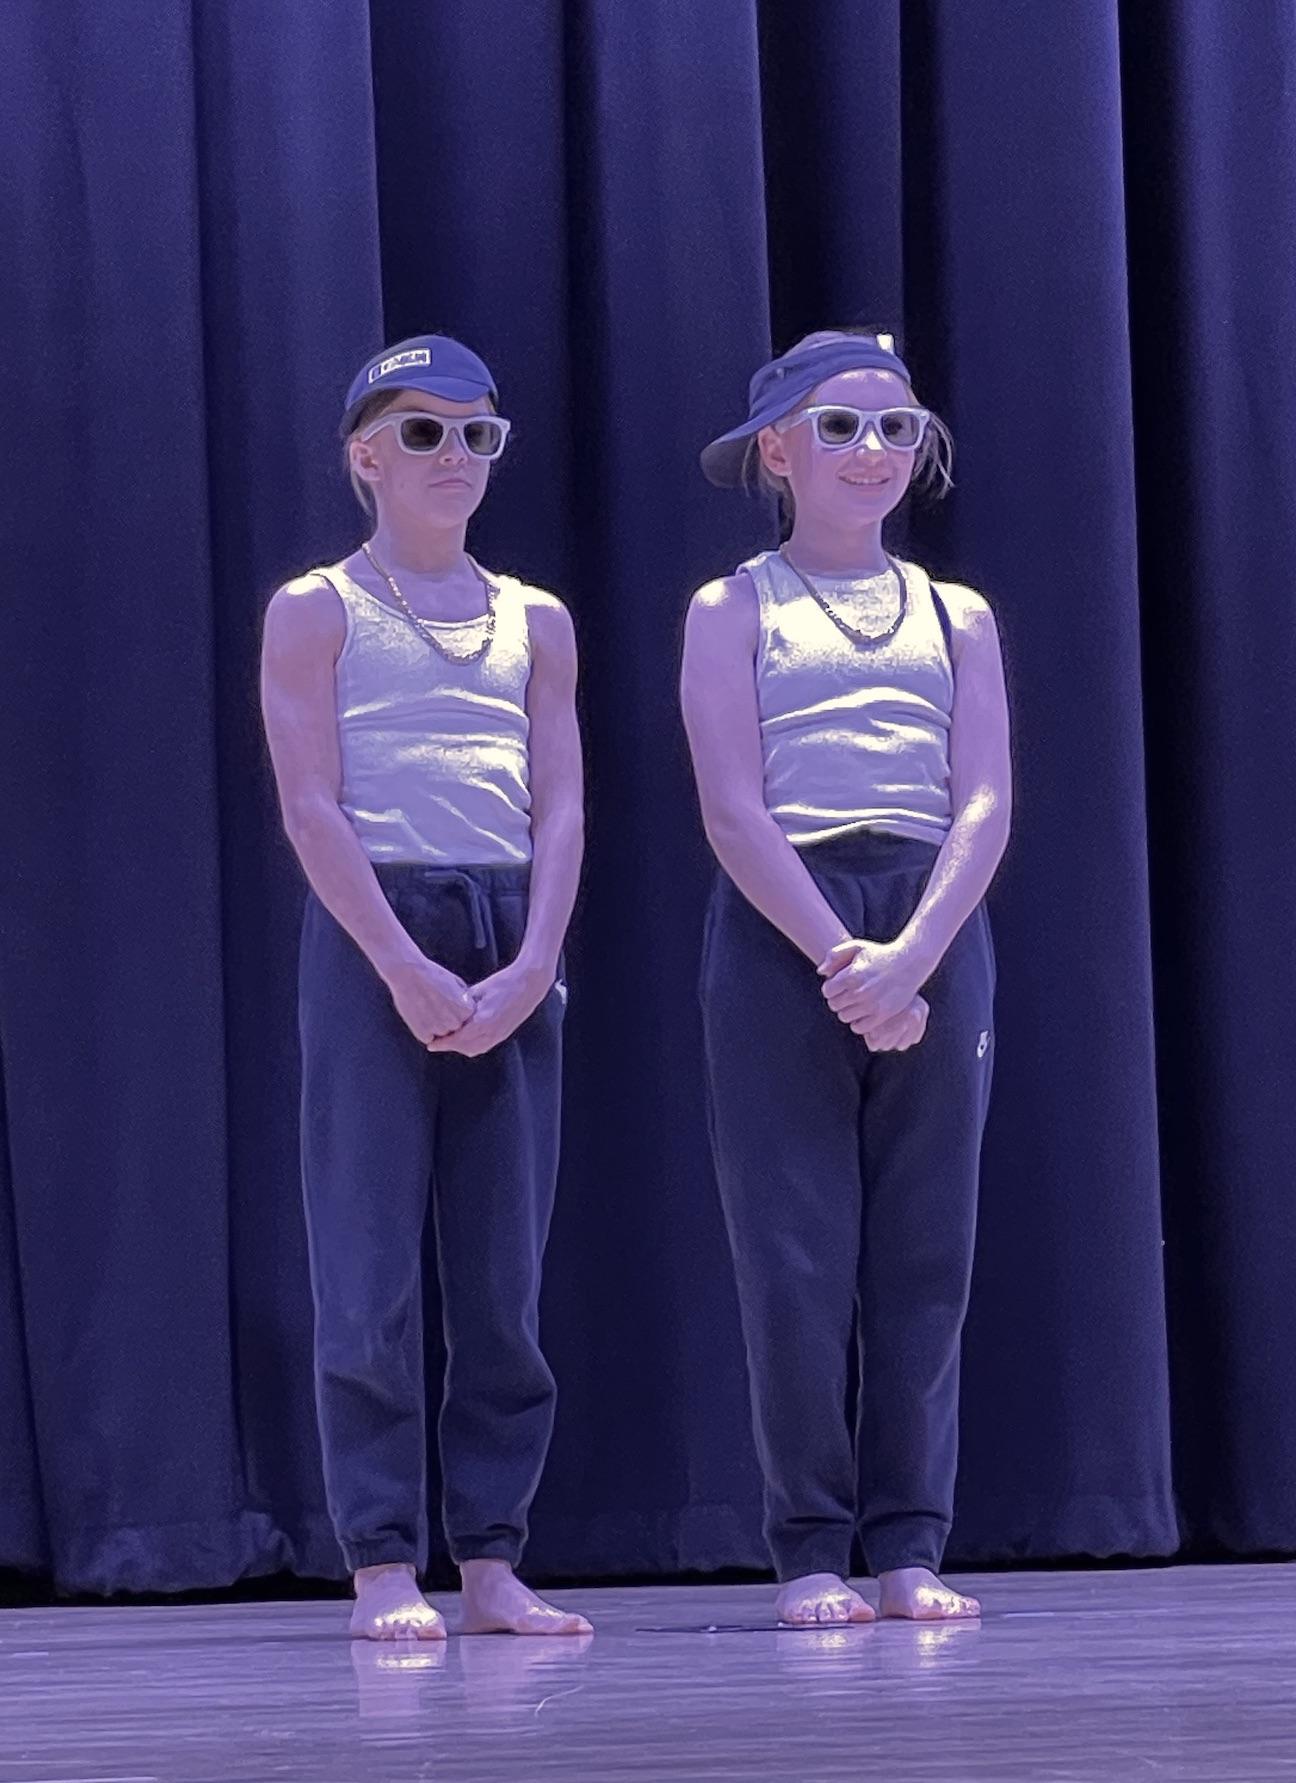 5th-graders Lillian Hawk and Kate Welsh performed a dance